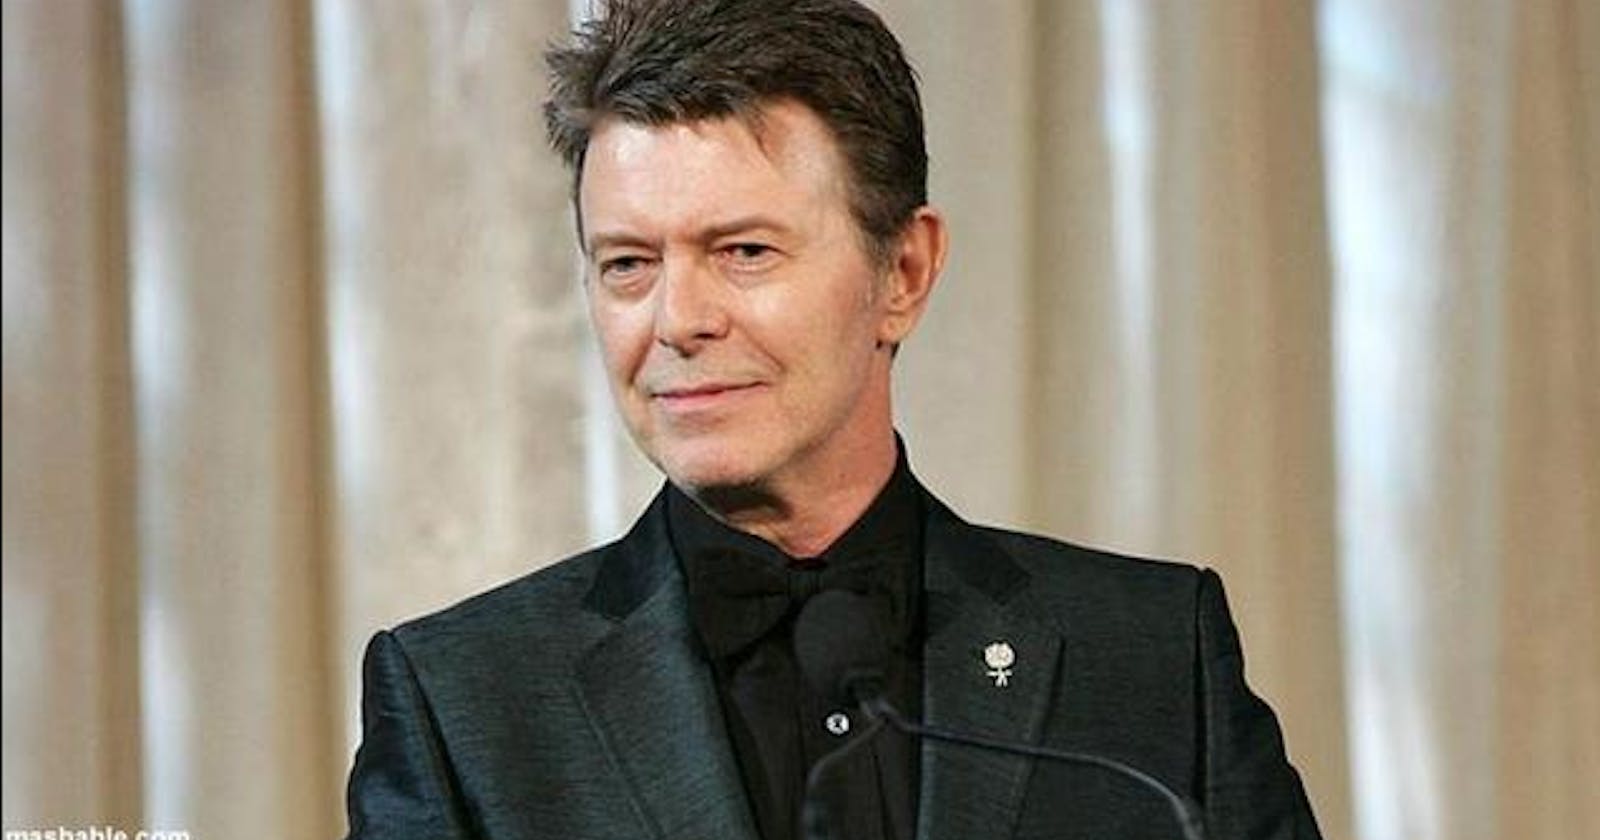 David Bowie named Britain's most influential artist